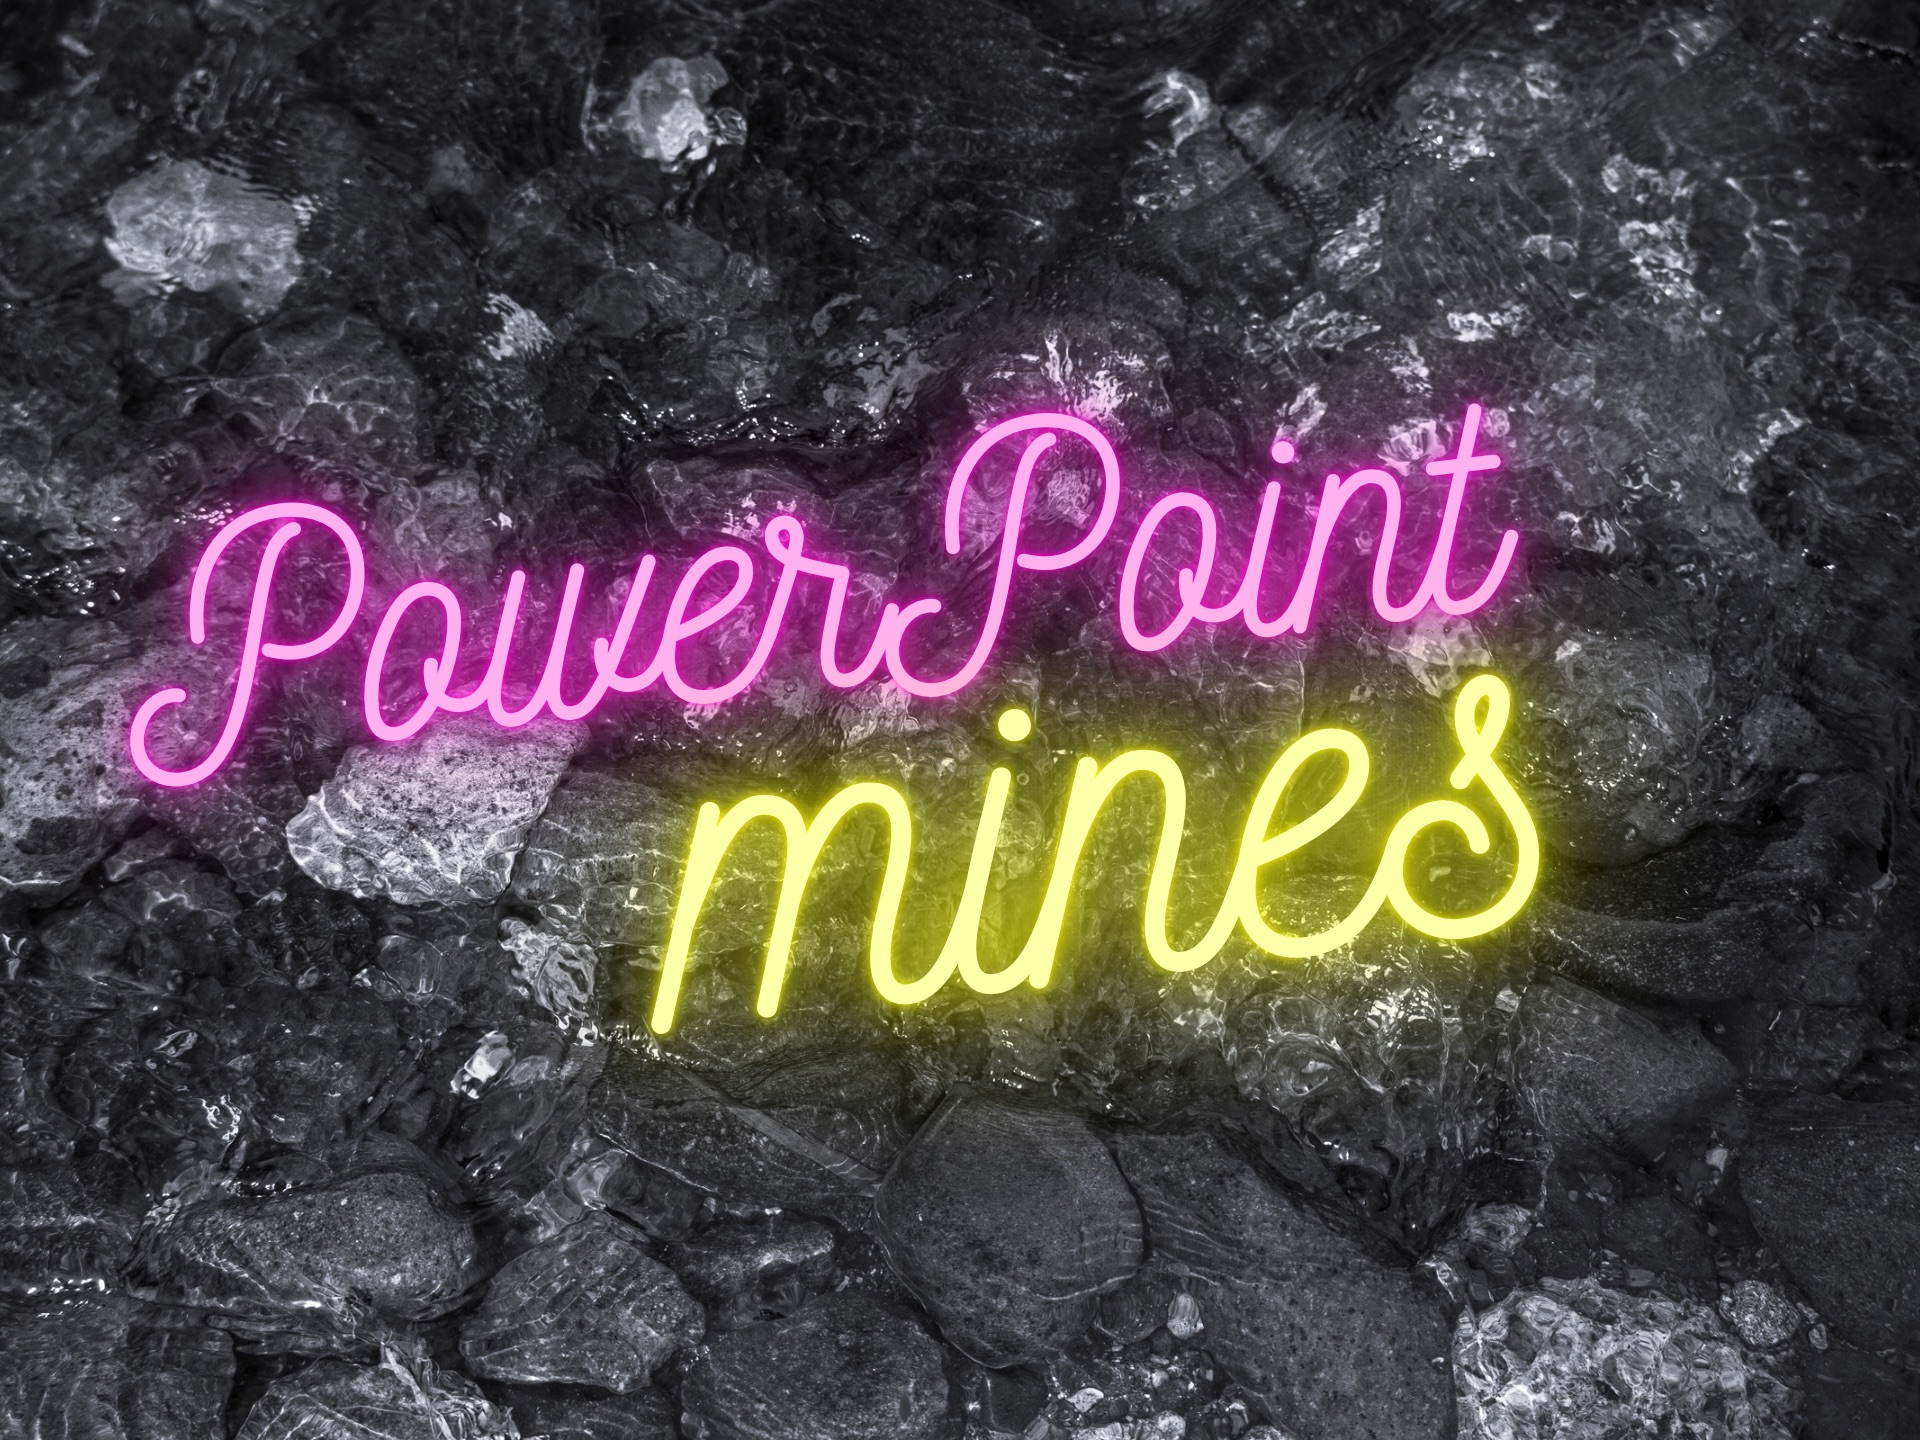 Issue #116: A note from the PowerPoint mines